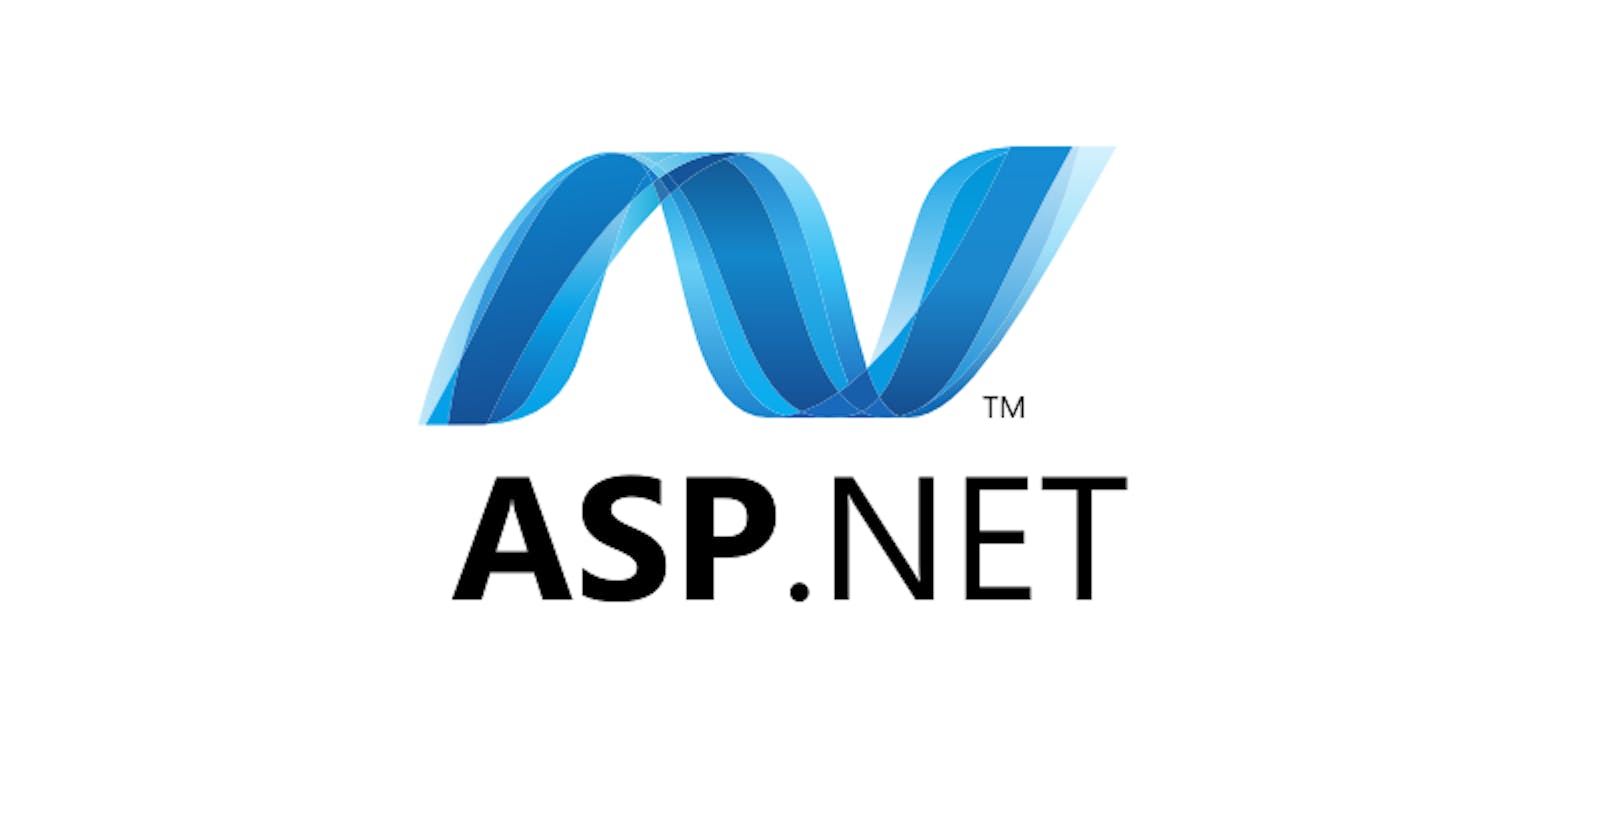 ASP.NET interview questions and answers for software developers